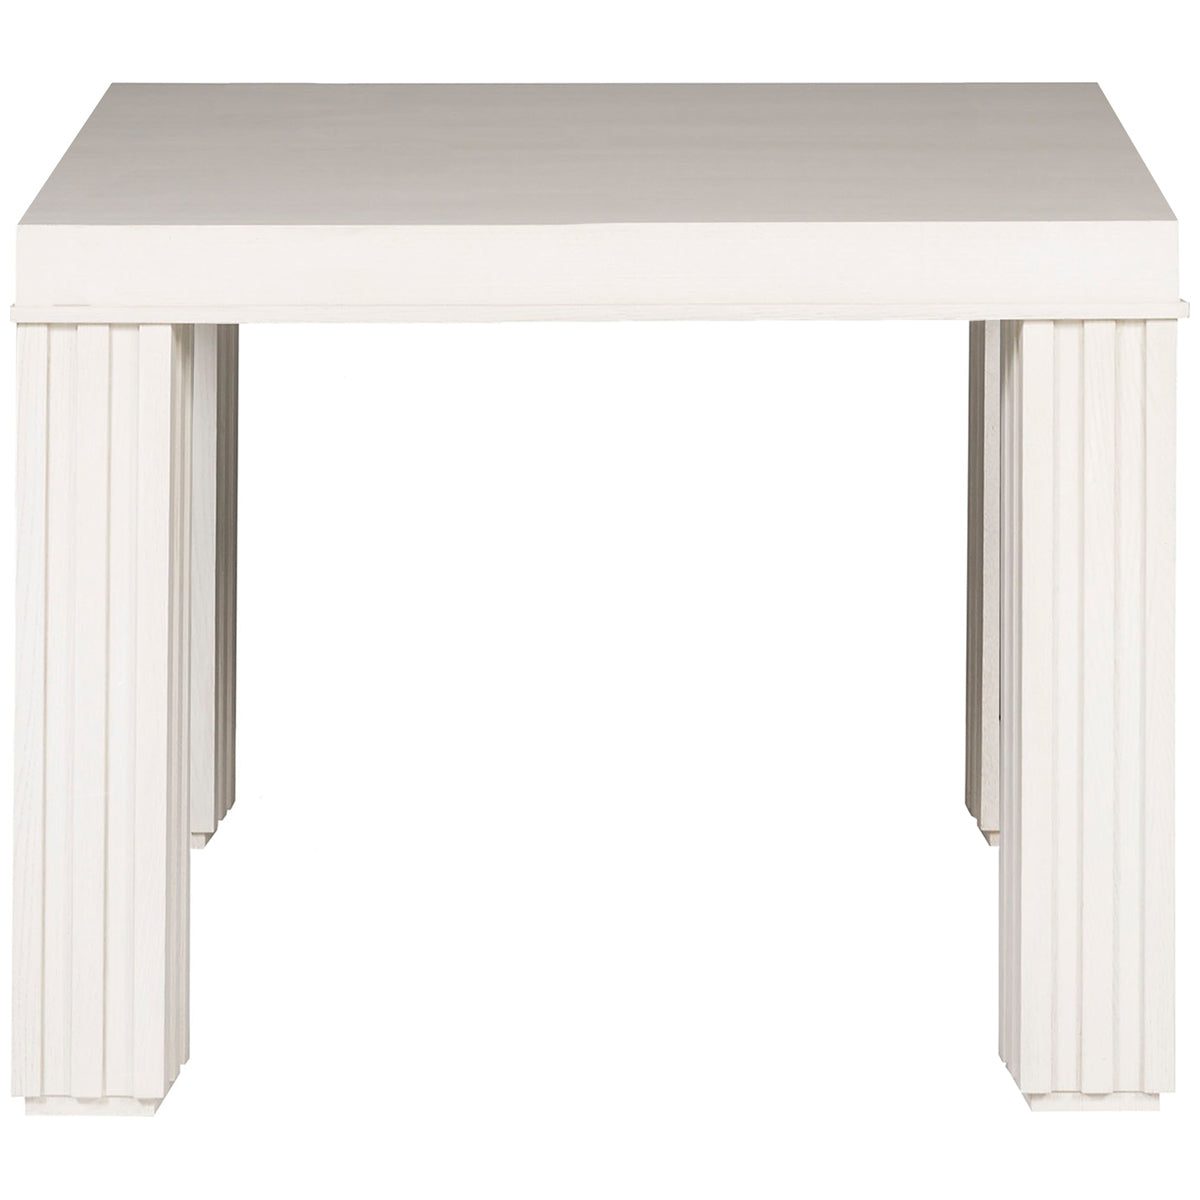 Vanguard Furniture Fluted Dining Table